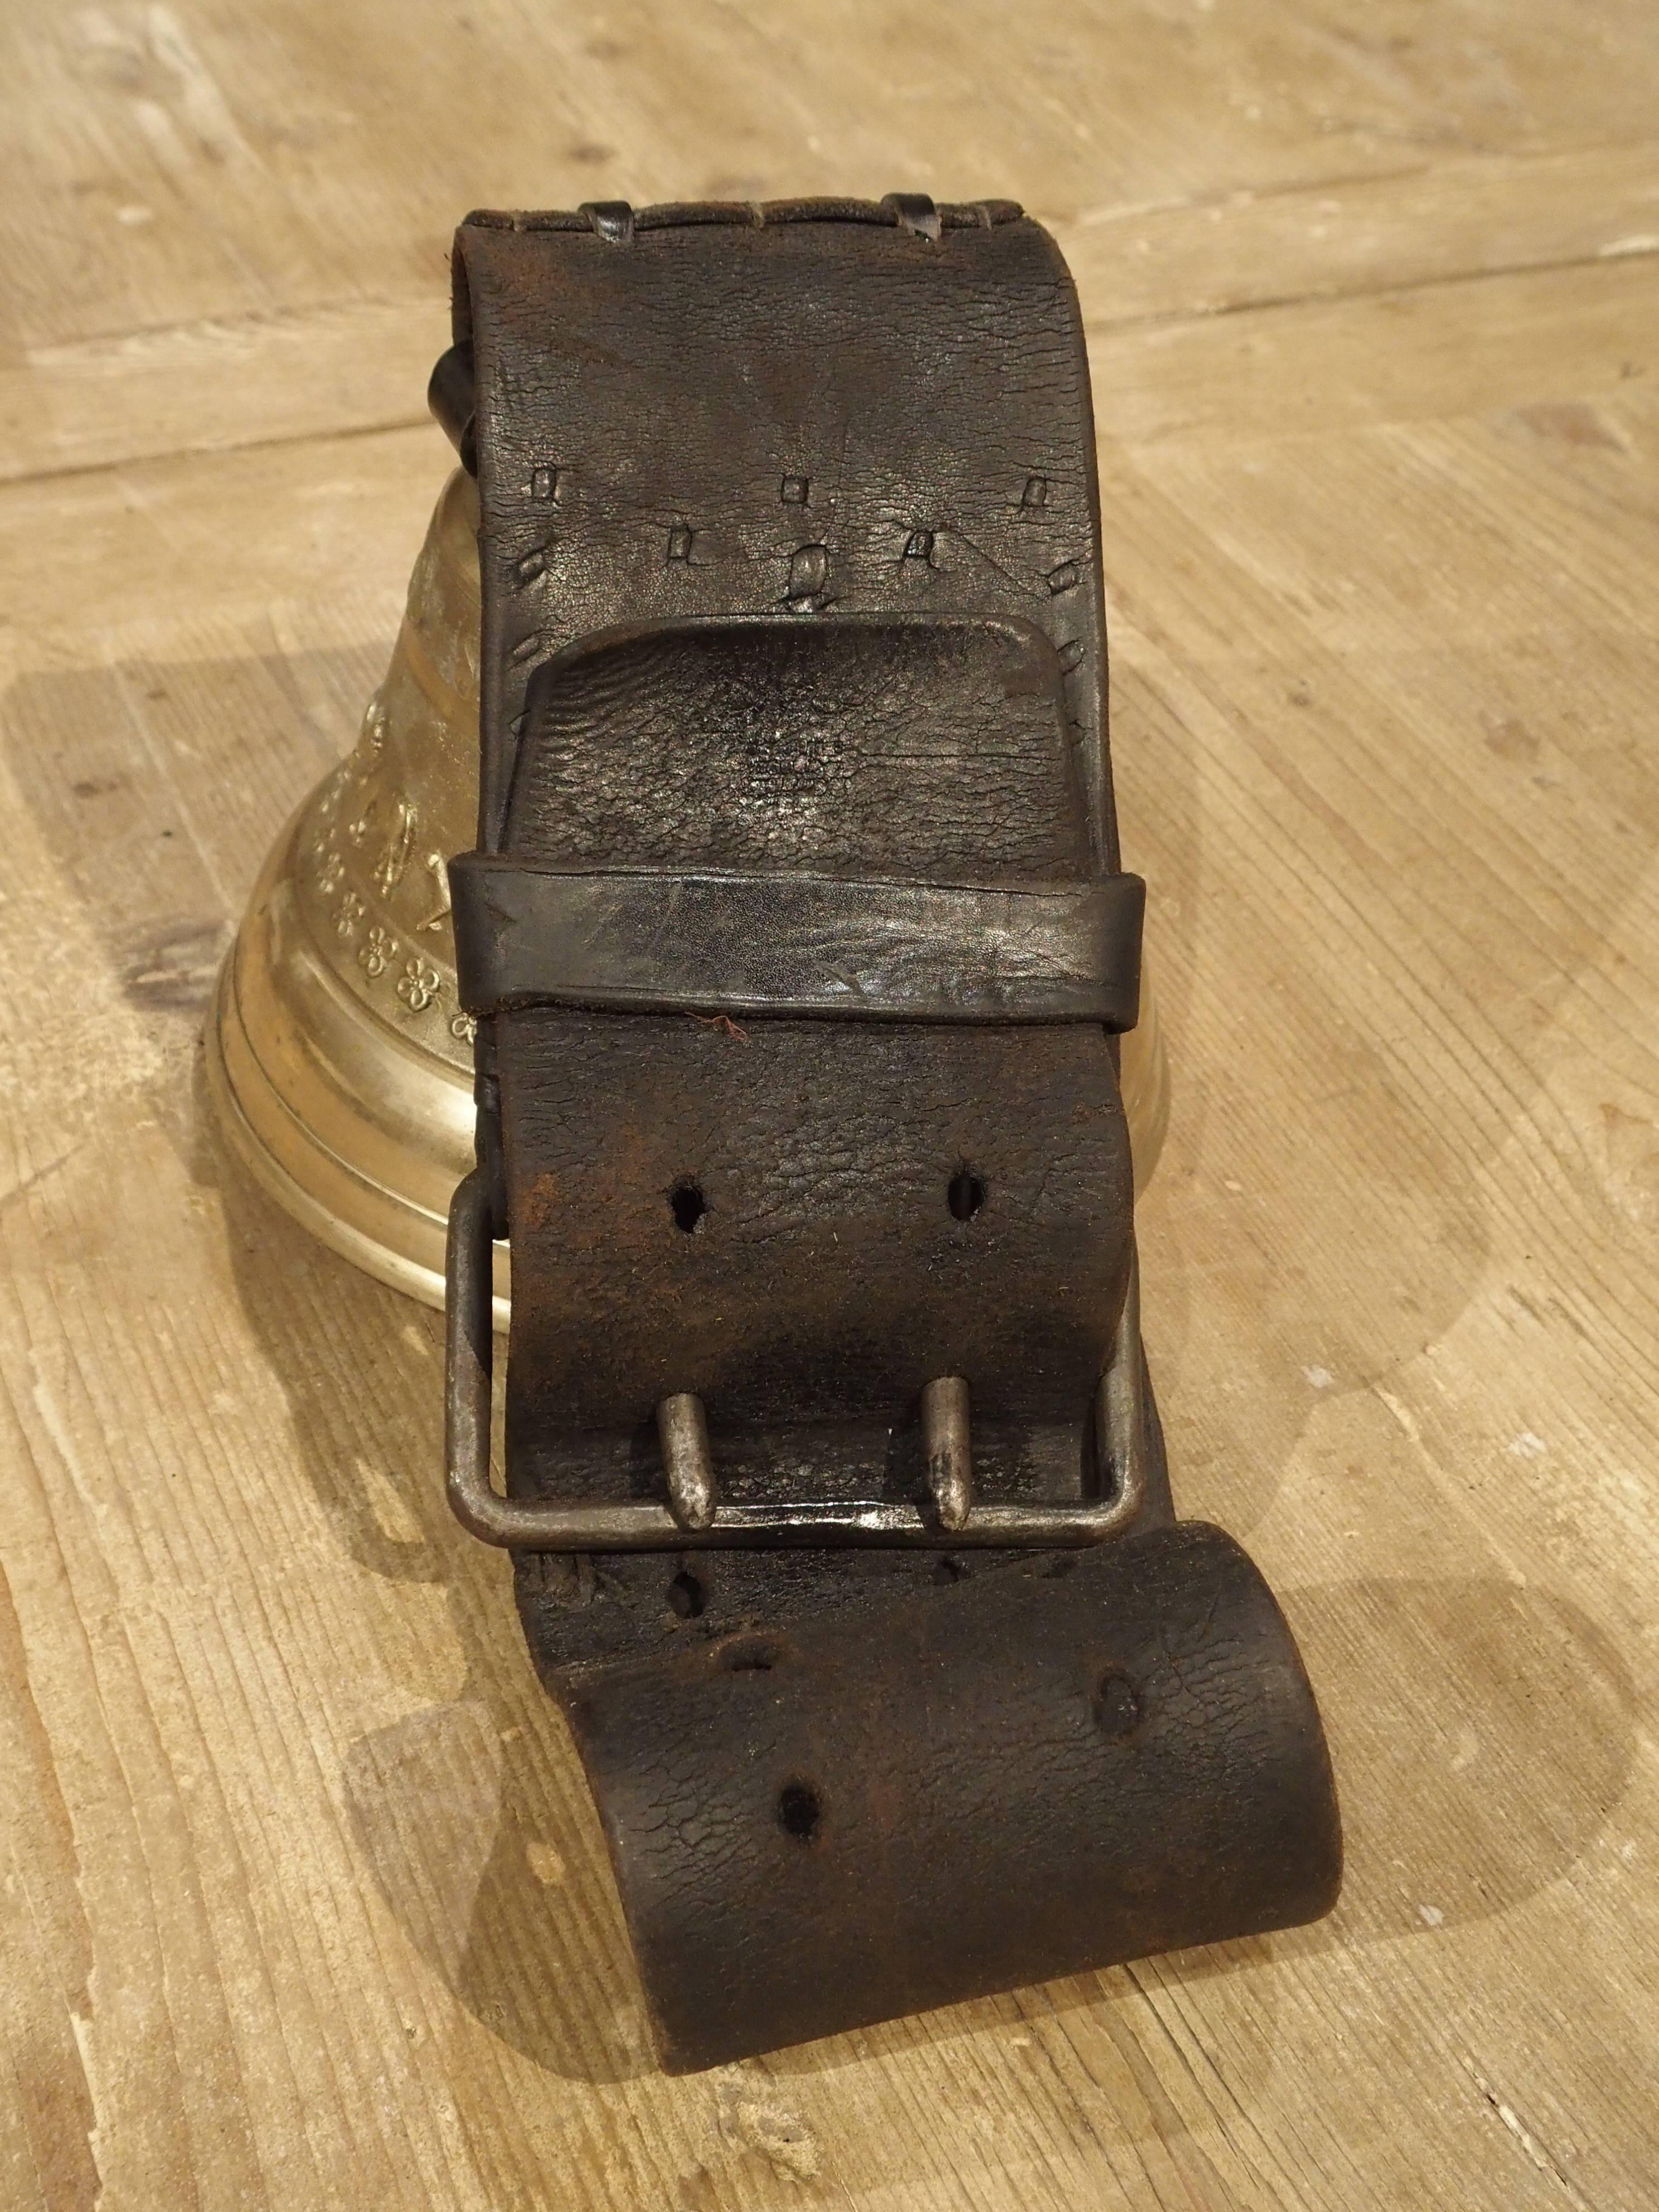 This antique bronze Swiss cowbell has a leather strap for securing the bell around the animal’s neck. It was used to track animals within the herd. The cowbell was not only used on cows, but also various animals within other herds including cows,